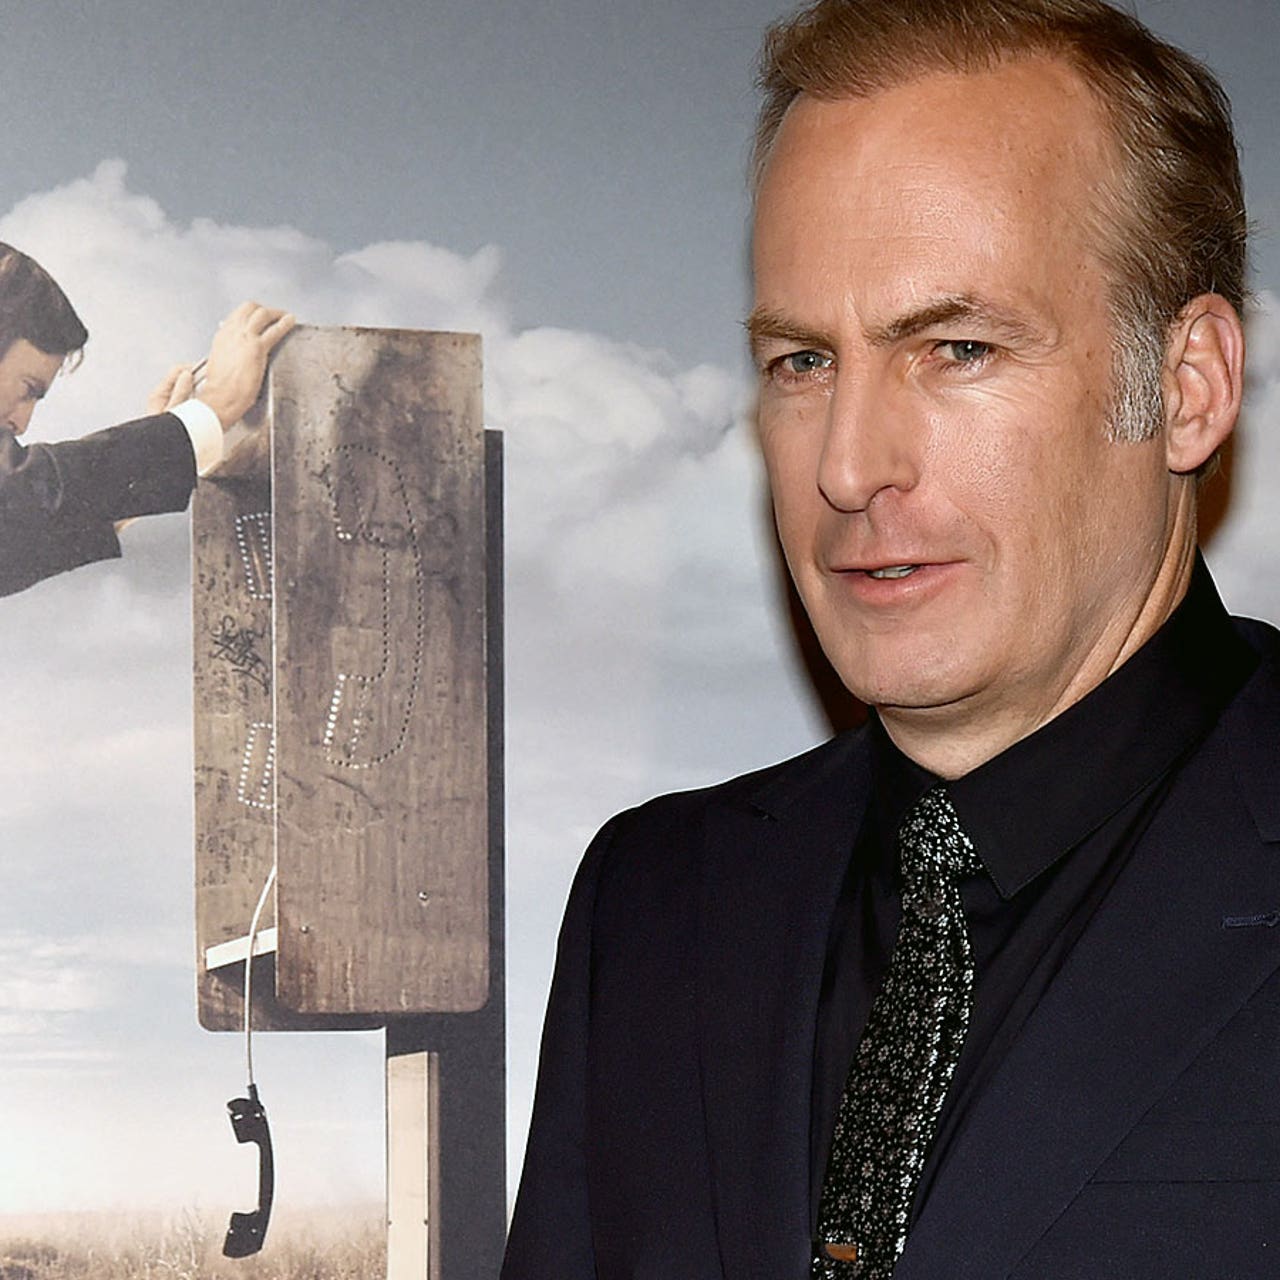 Move Over Don Draper - 'Better Call Saul' Has the Best Dressed Man on TV!